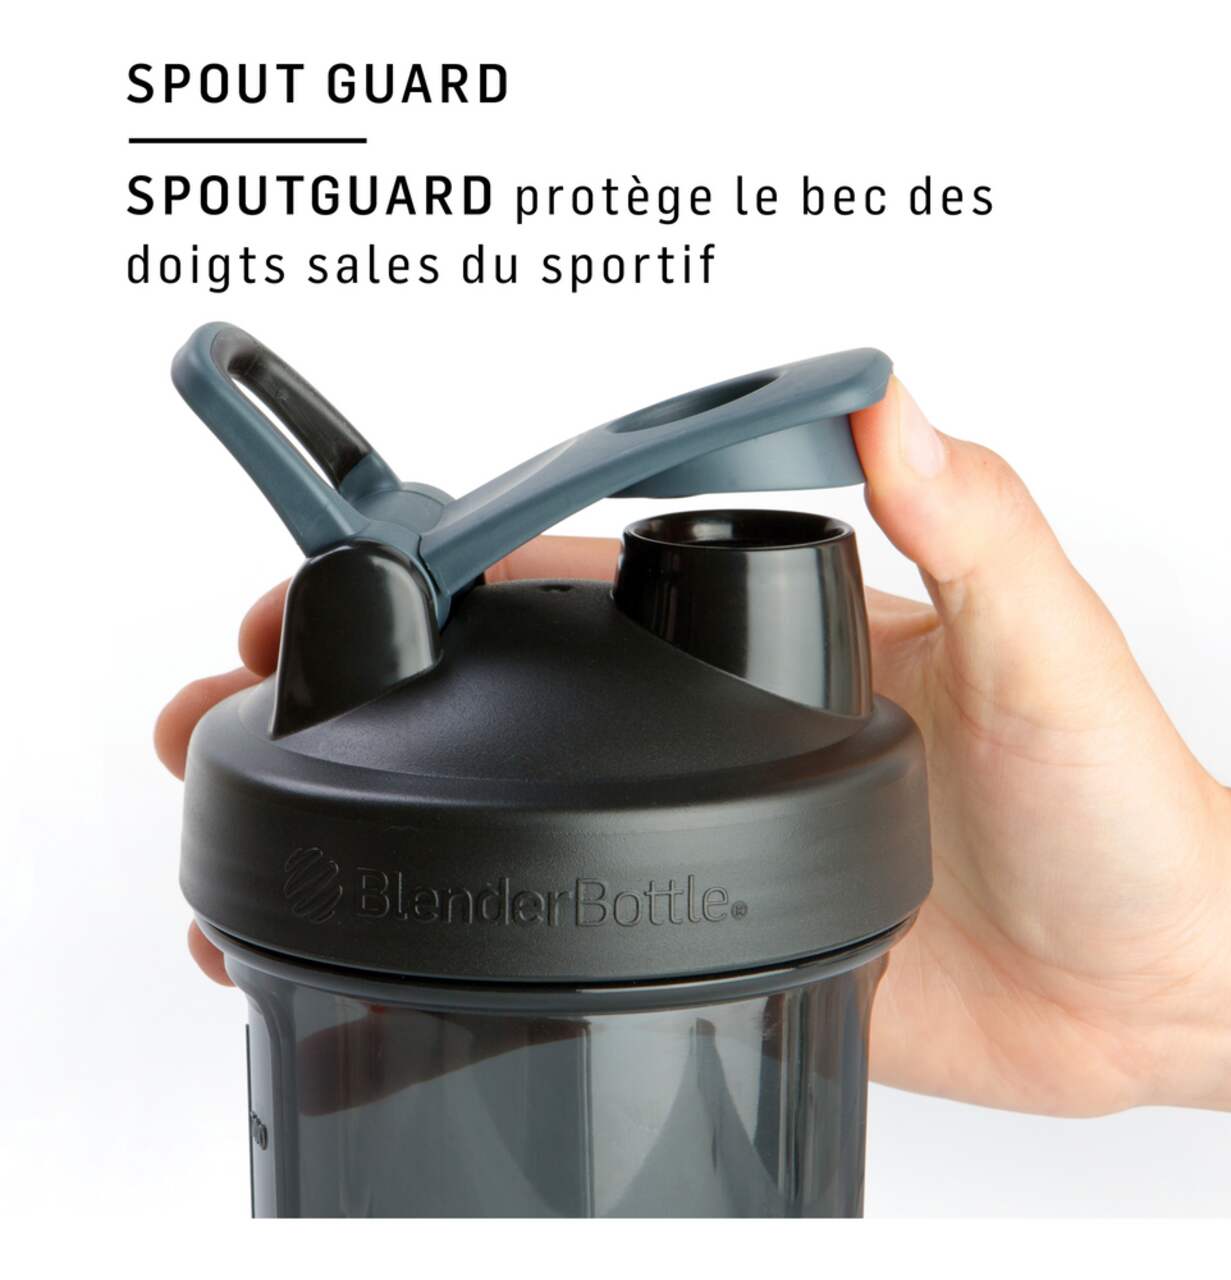 https://media-www.canadiantire.ca/product/playing/exercise/exercise-accessories/1840573/blenderbottle-pro-shaker-28oz-black-24c5715f-b1e0-42f6-8d0d-d612df7ac751.png?imdensity=1&imwidth=1244&impolicy=mZoom